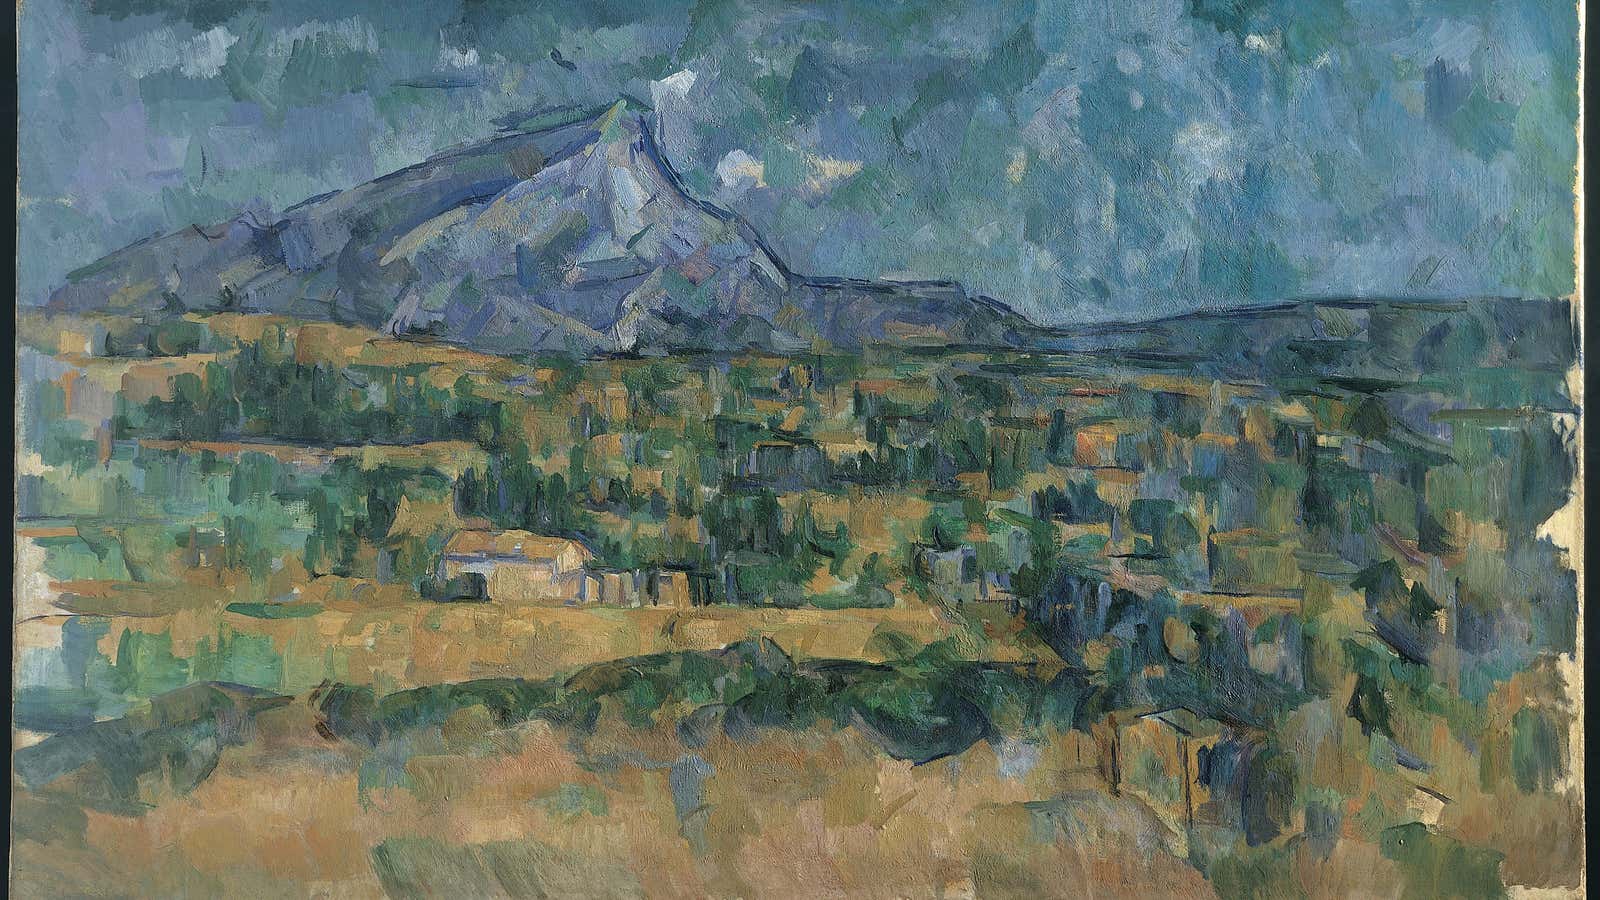 Cézanne certainly appreciated the mountain.